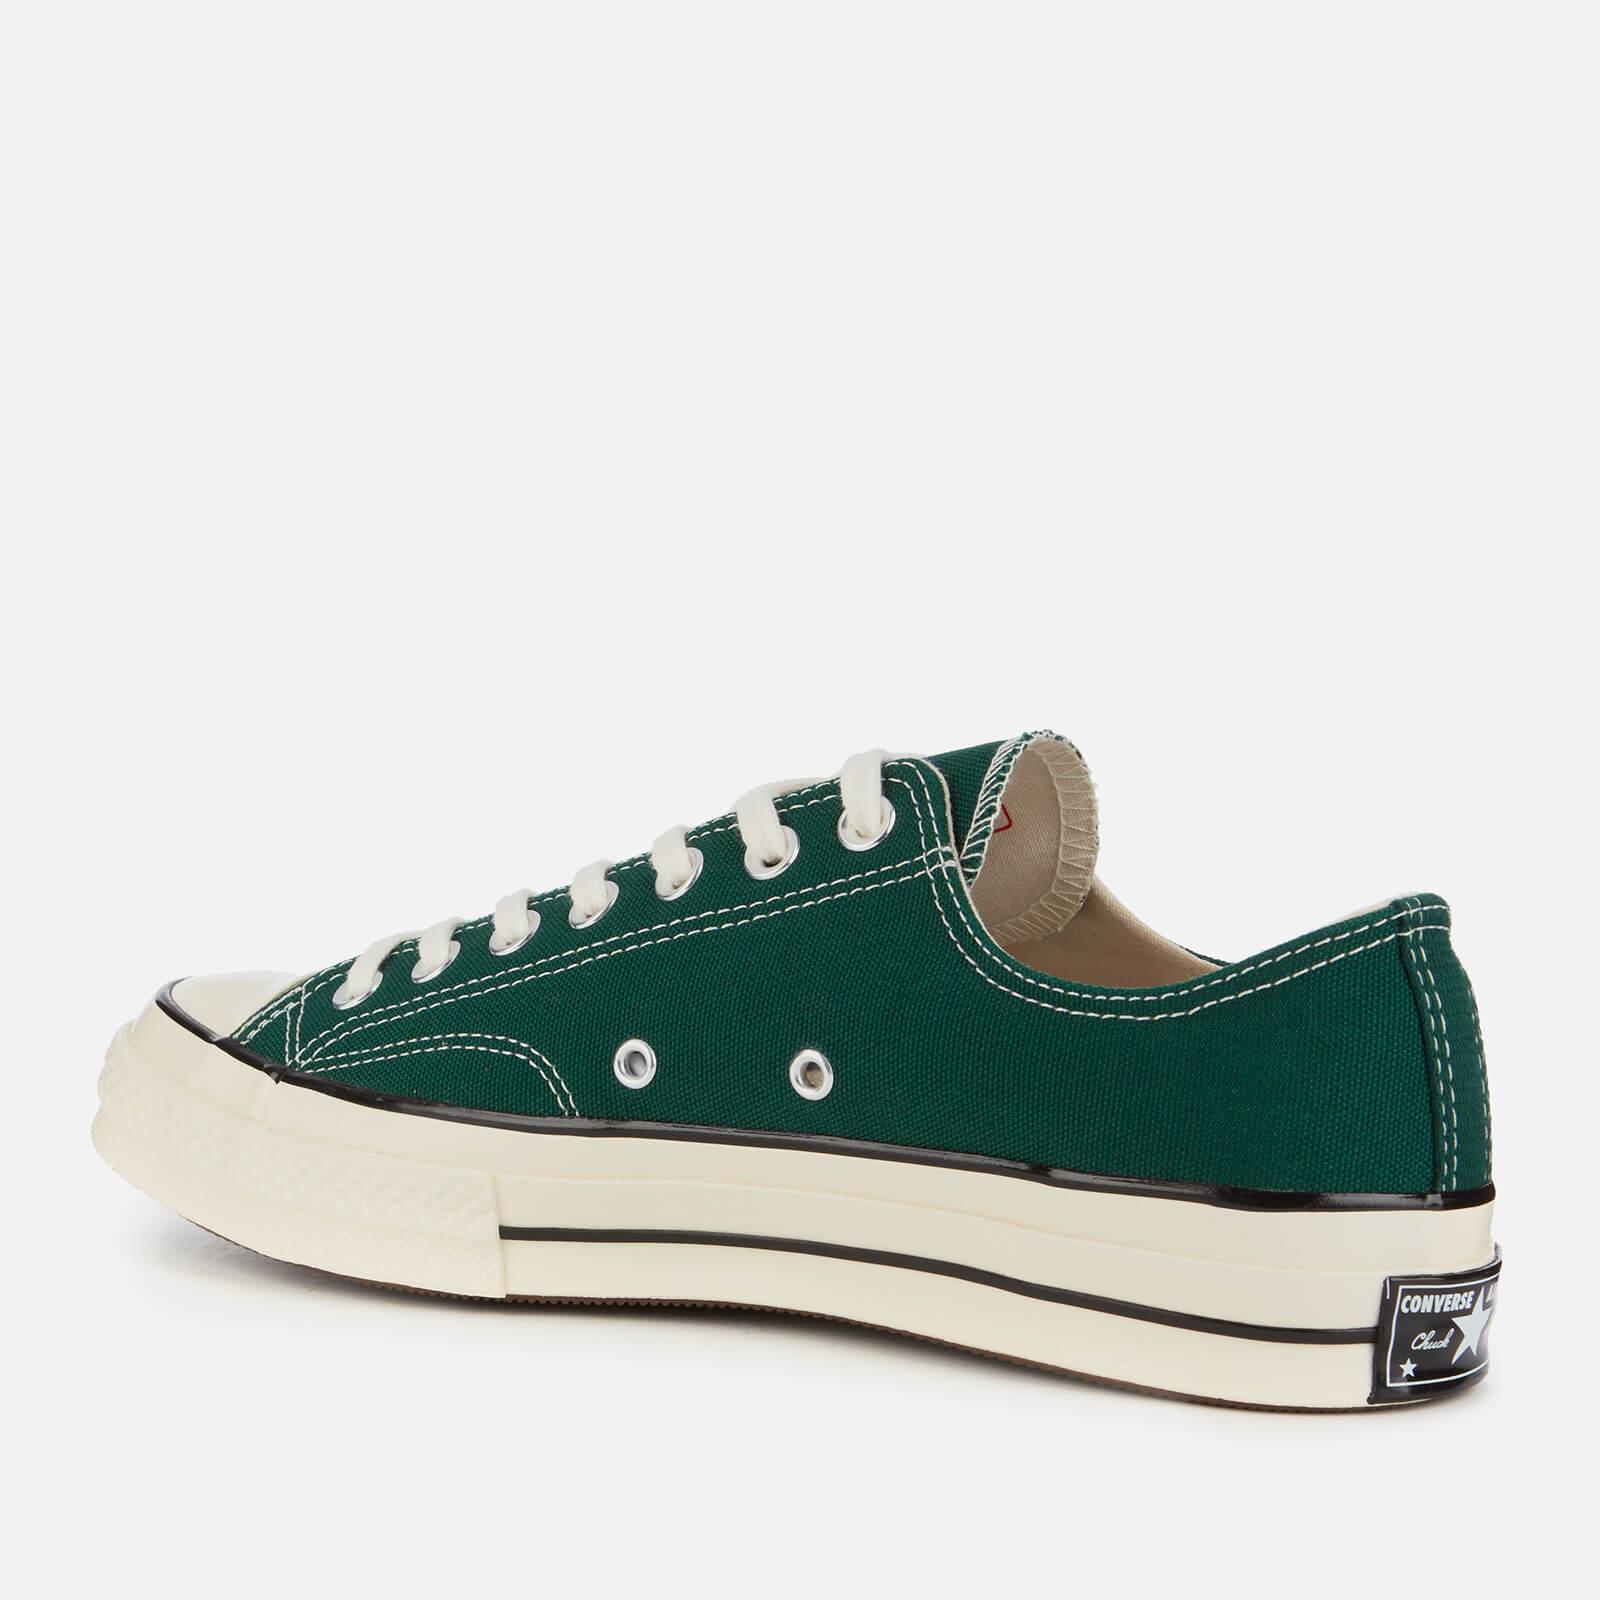 Converse Synthetic Chuck 70 Ox in Green for Men - Lyst